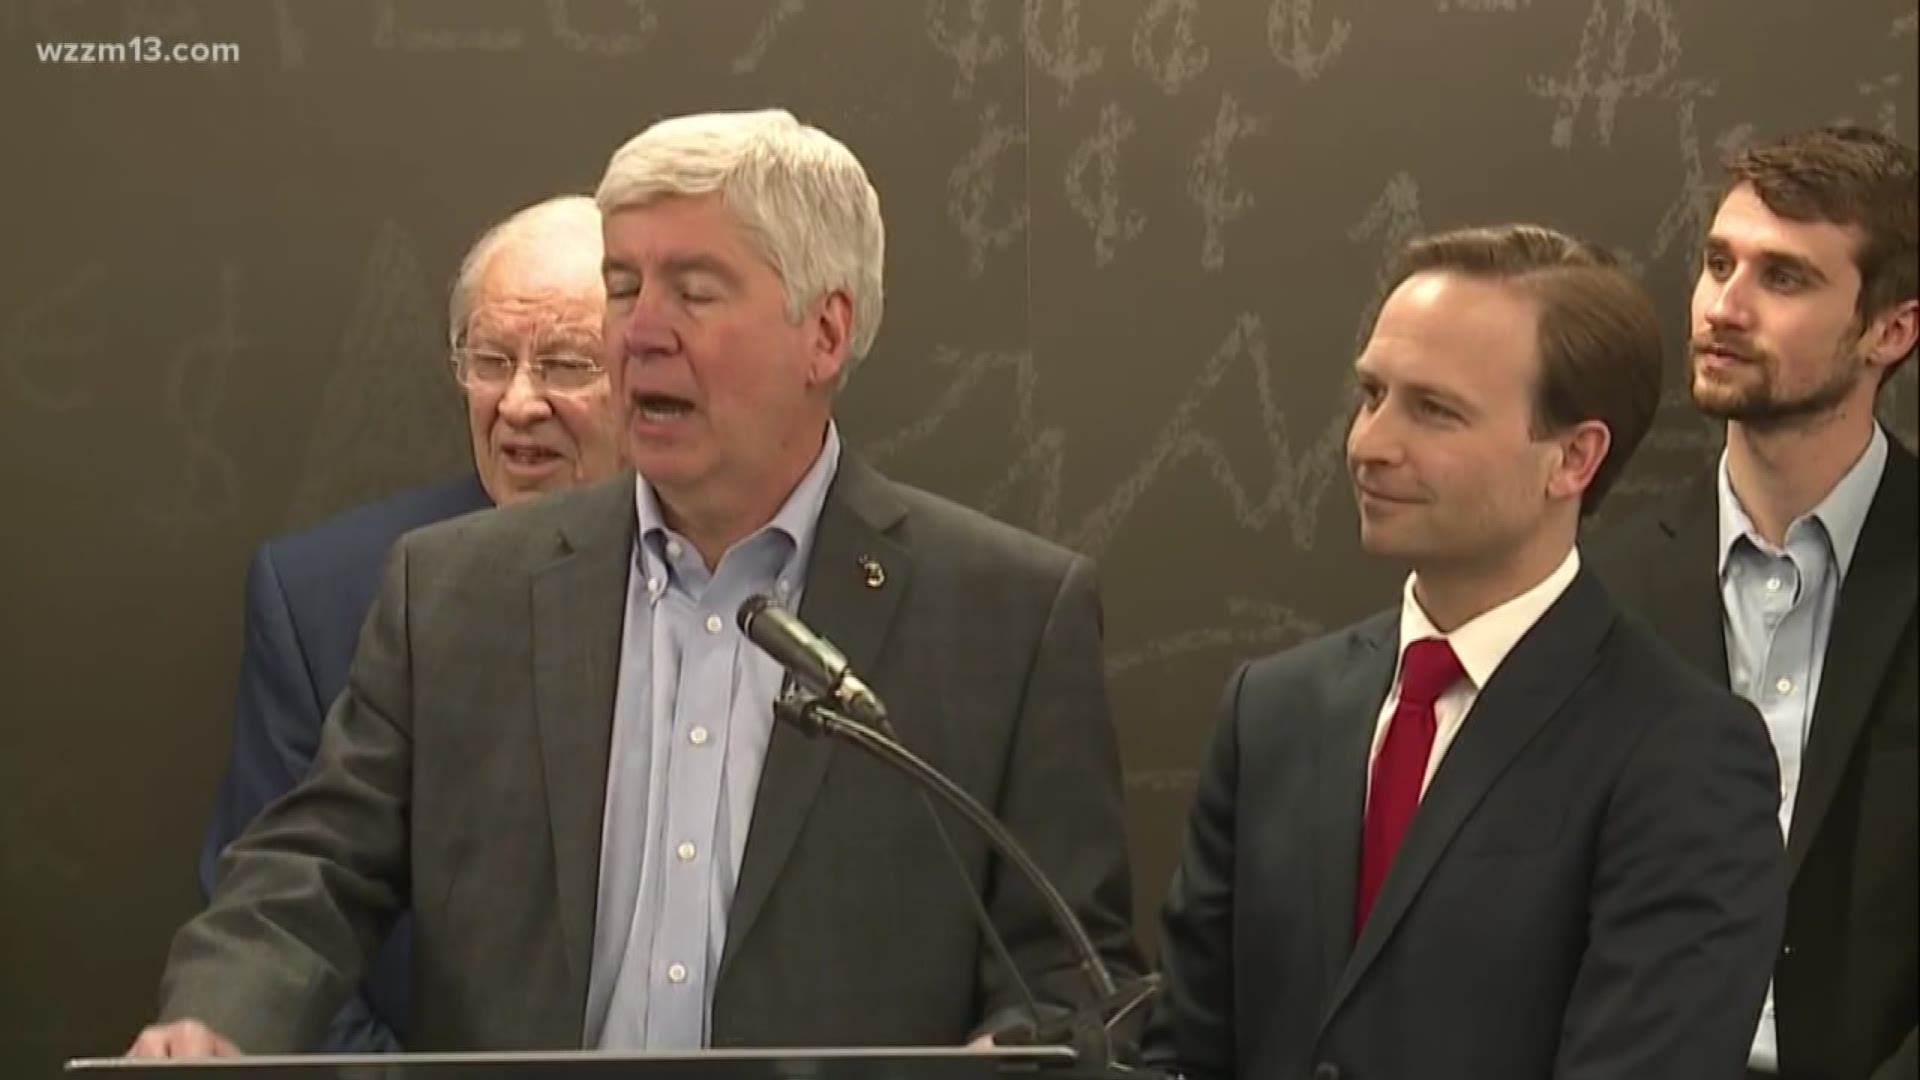 Governor Snyder endorses Lt. Governor Calley to replace him